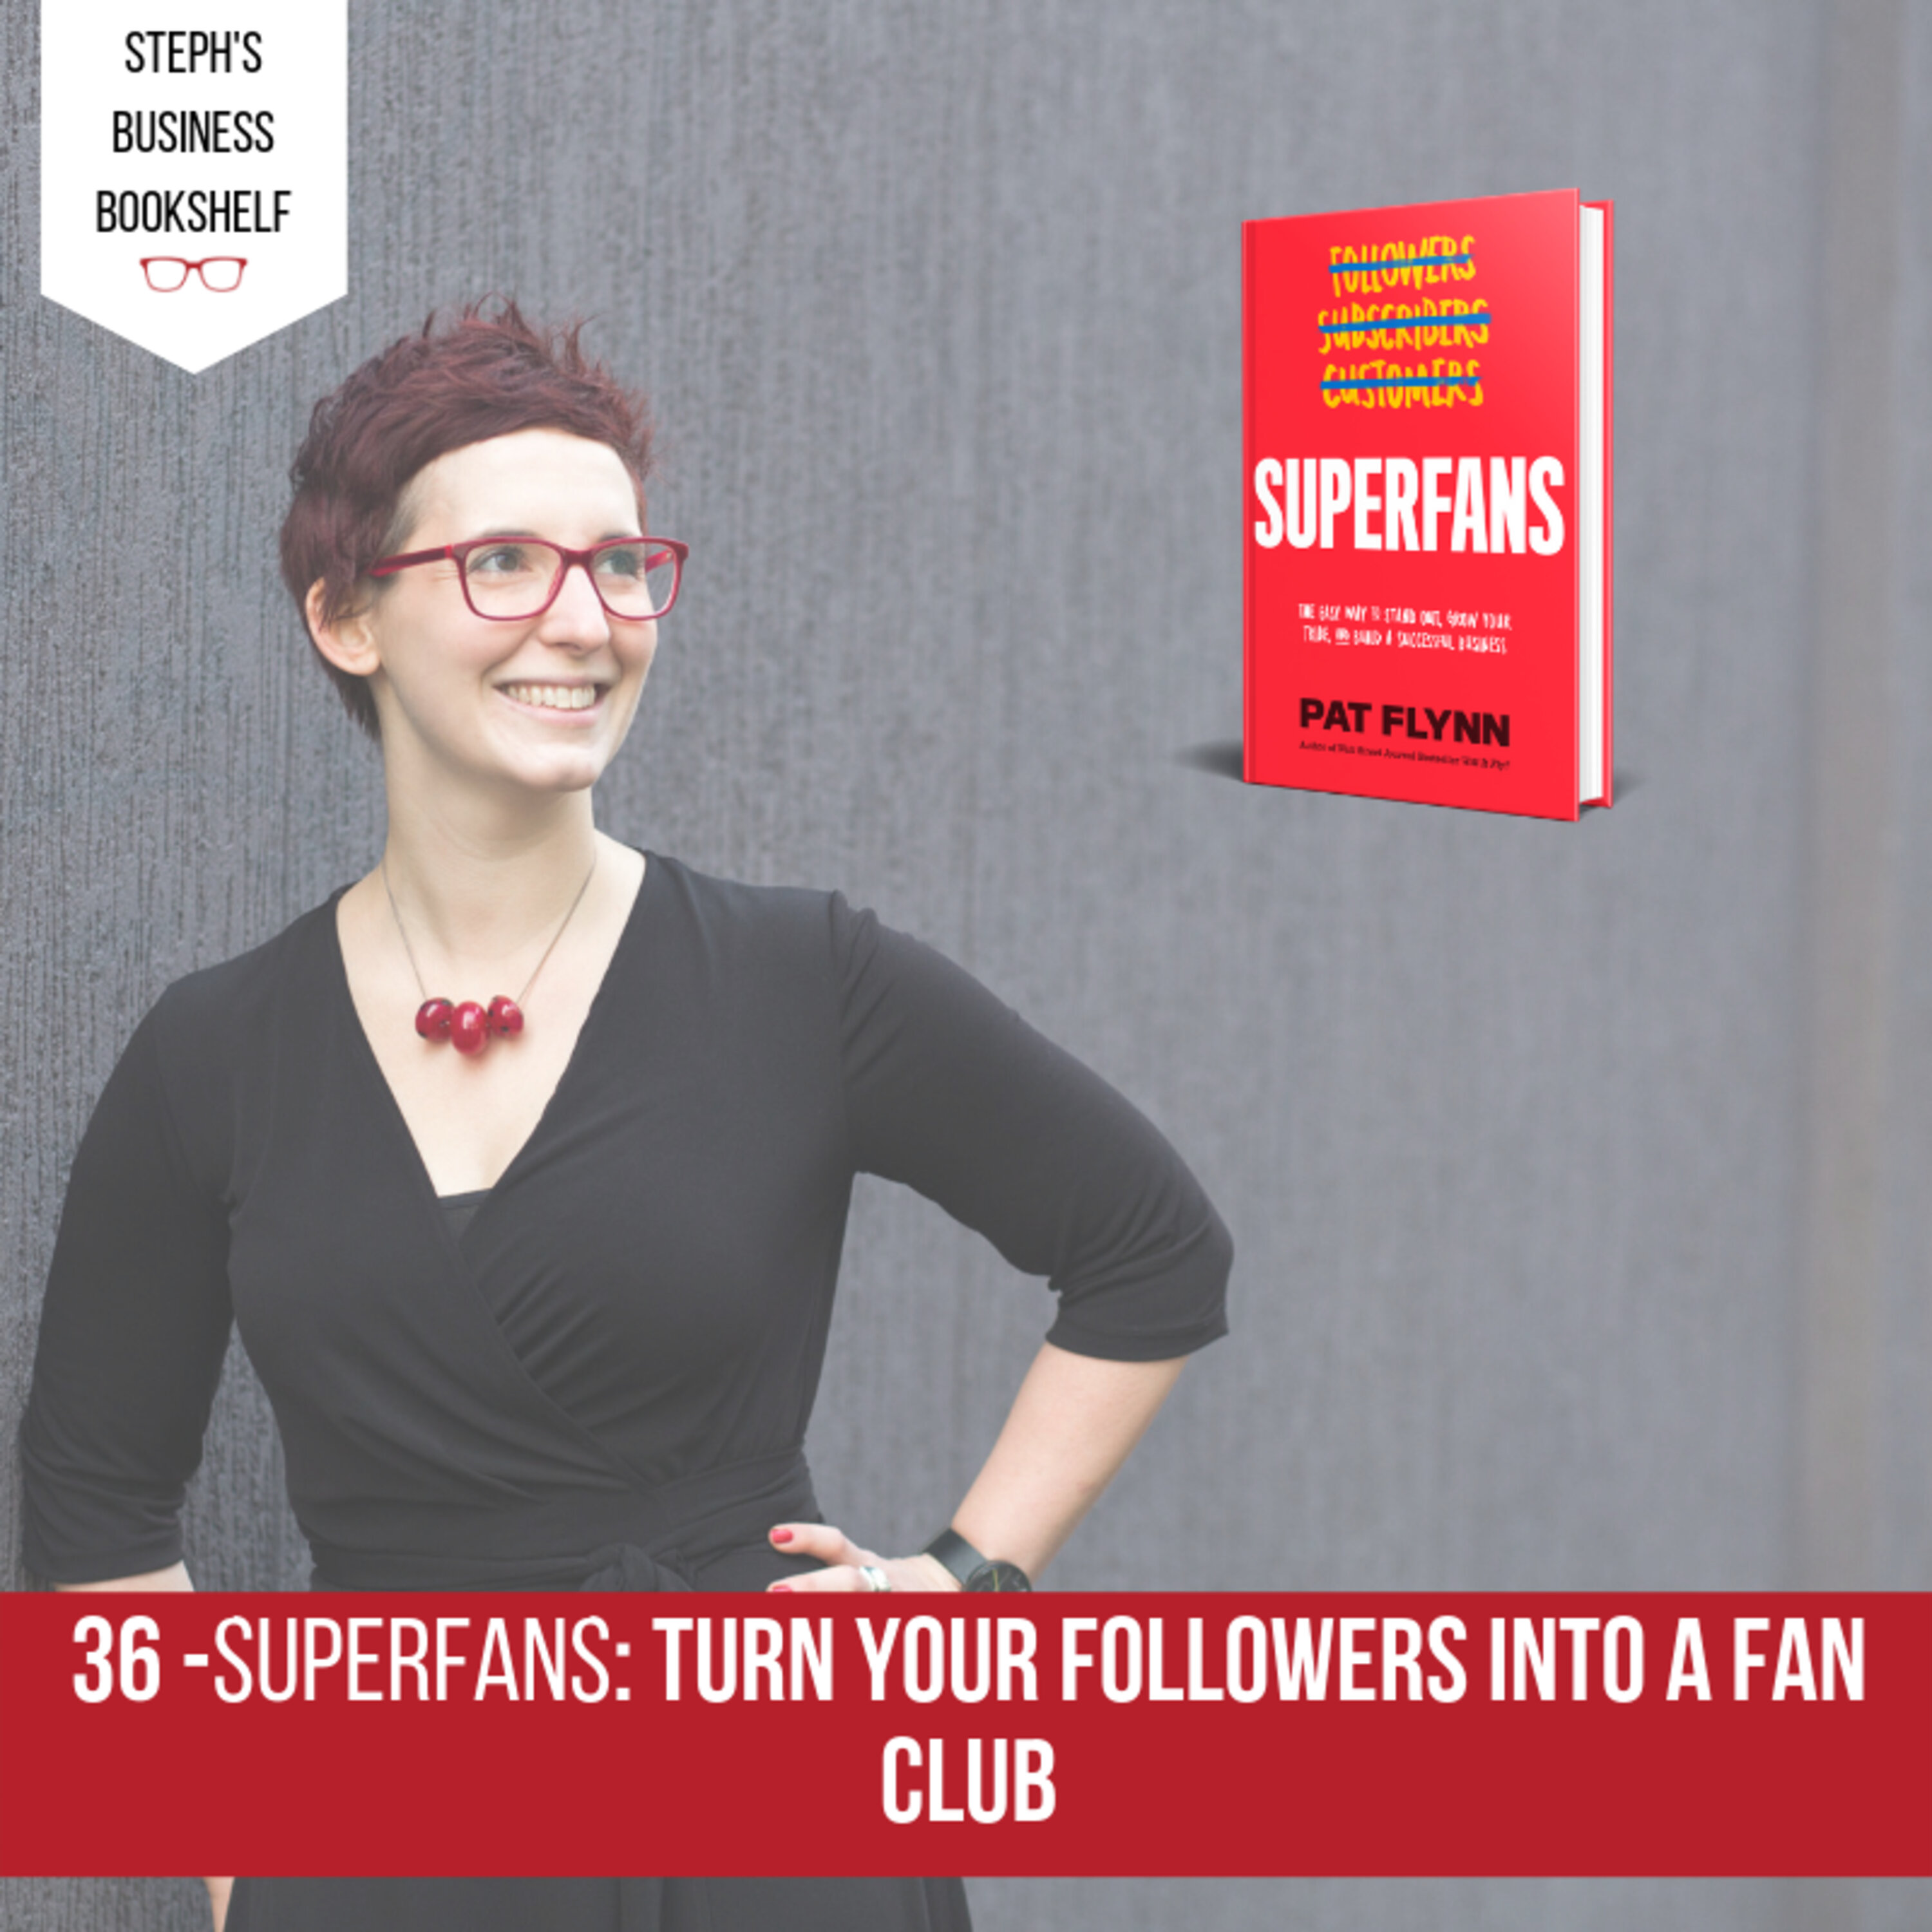 Superfans by Pat Flynn: Turn your followers into a fan club Image